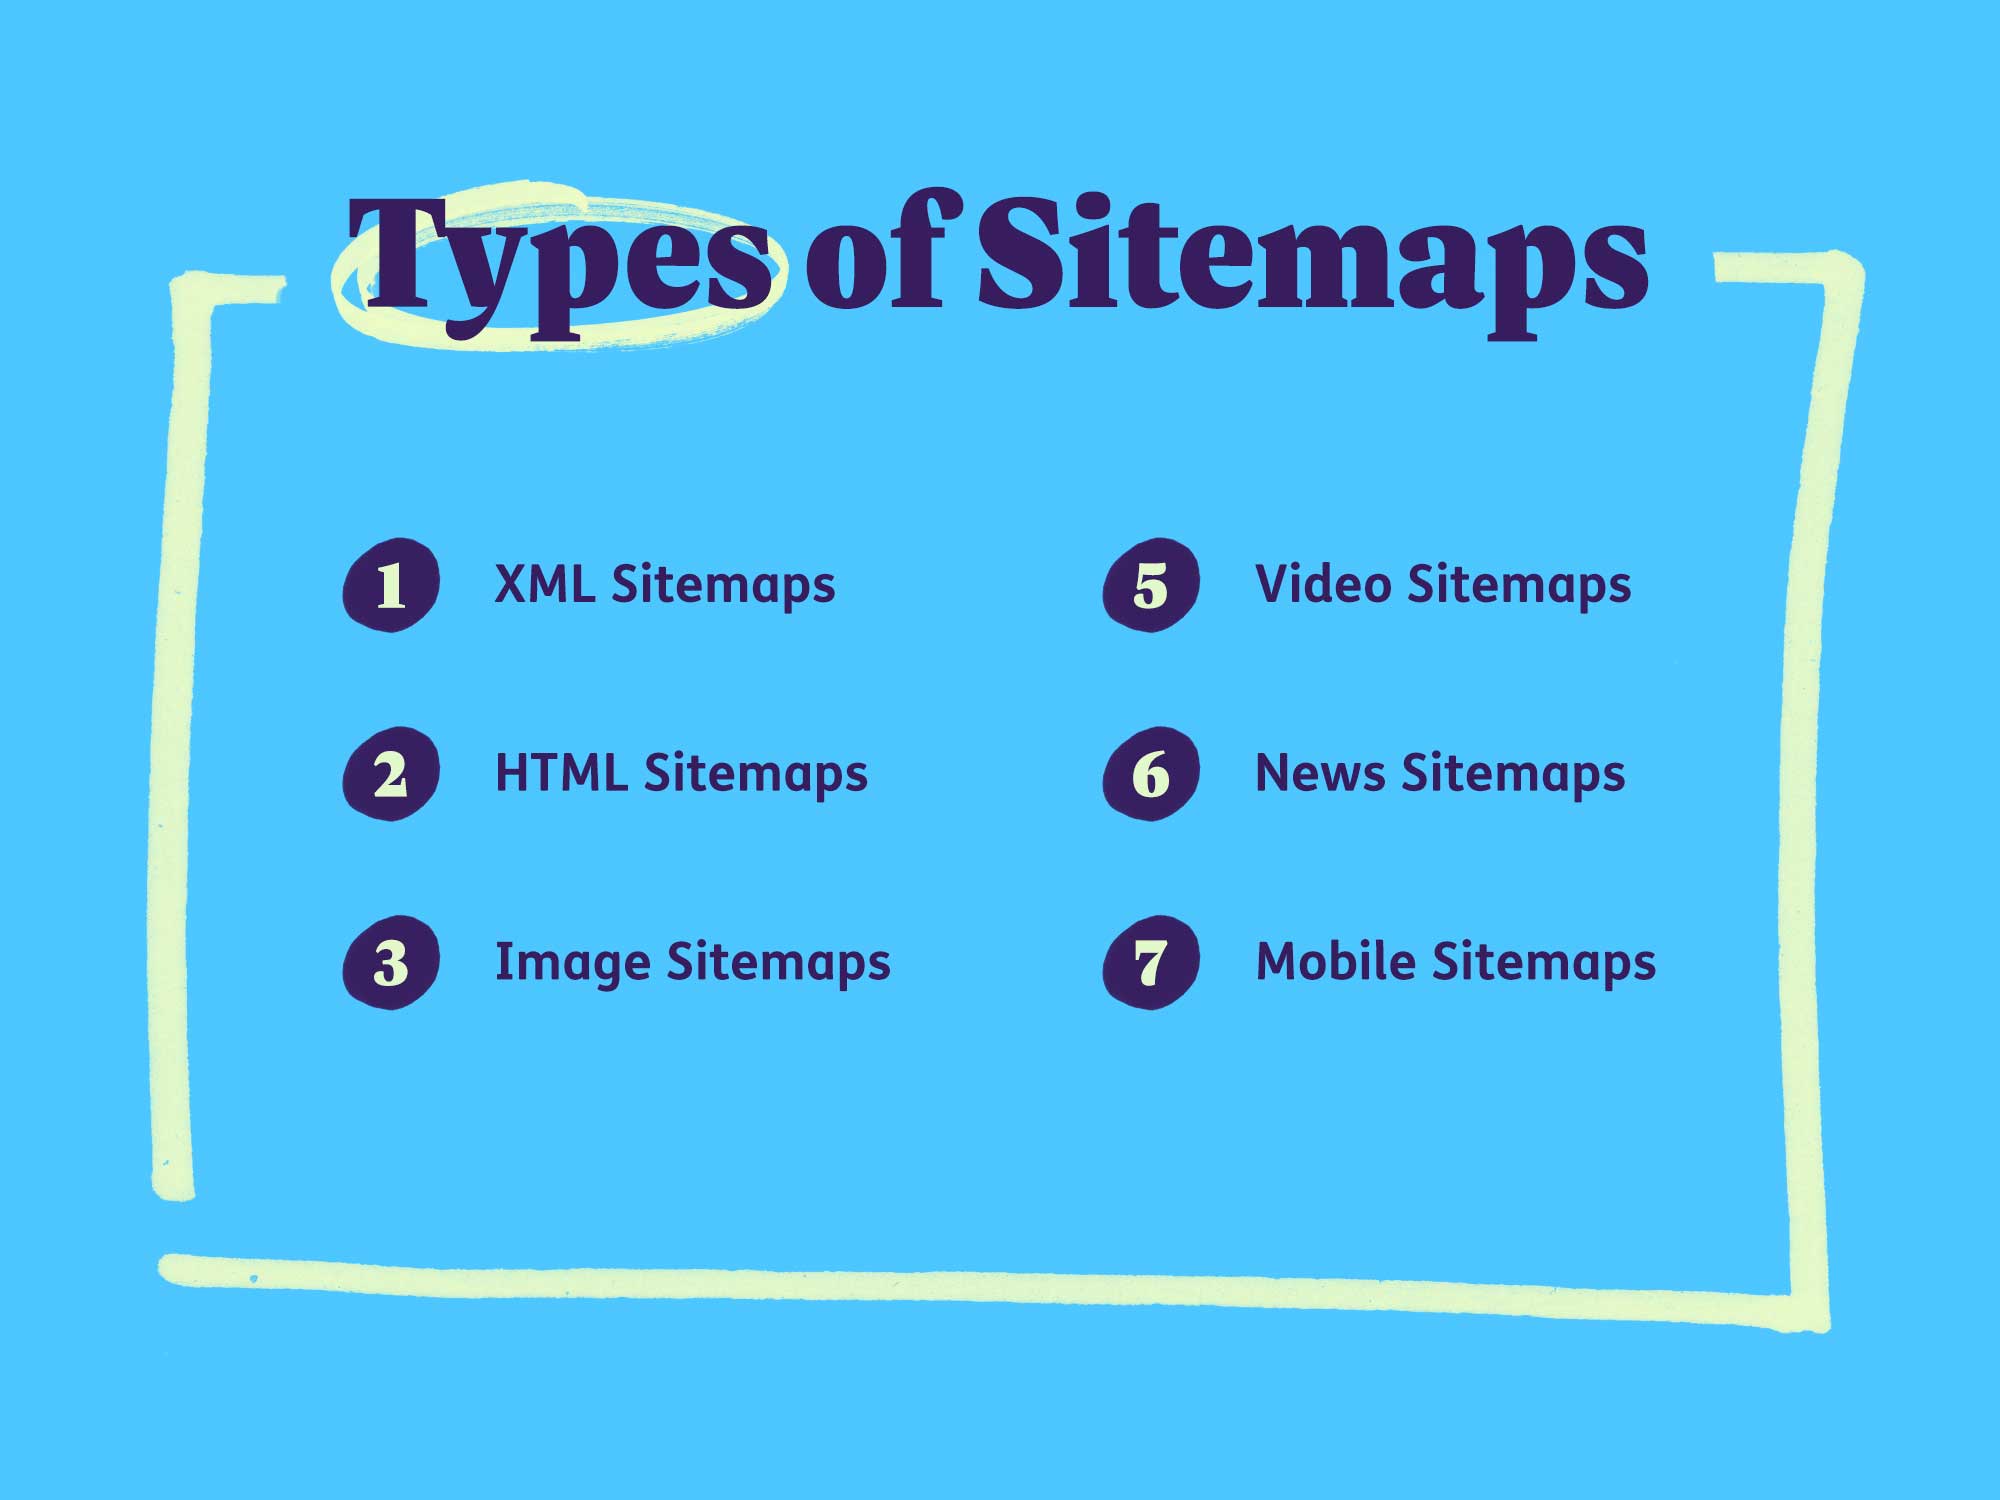 Types of sitemaps: XML, HTML, Image, Video, News, Mobile